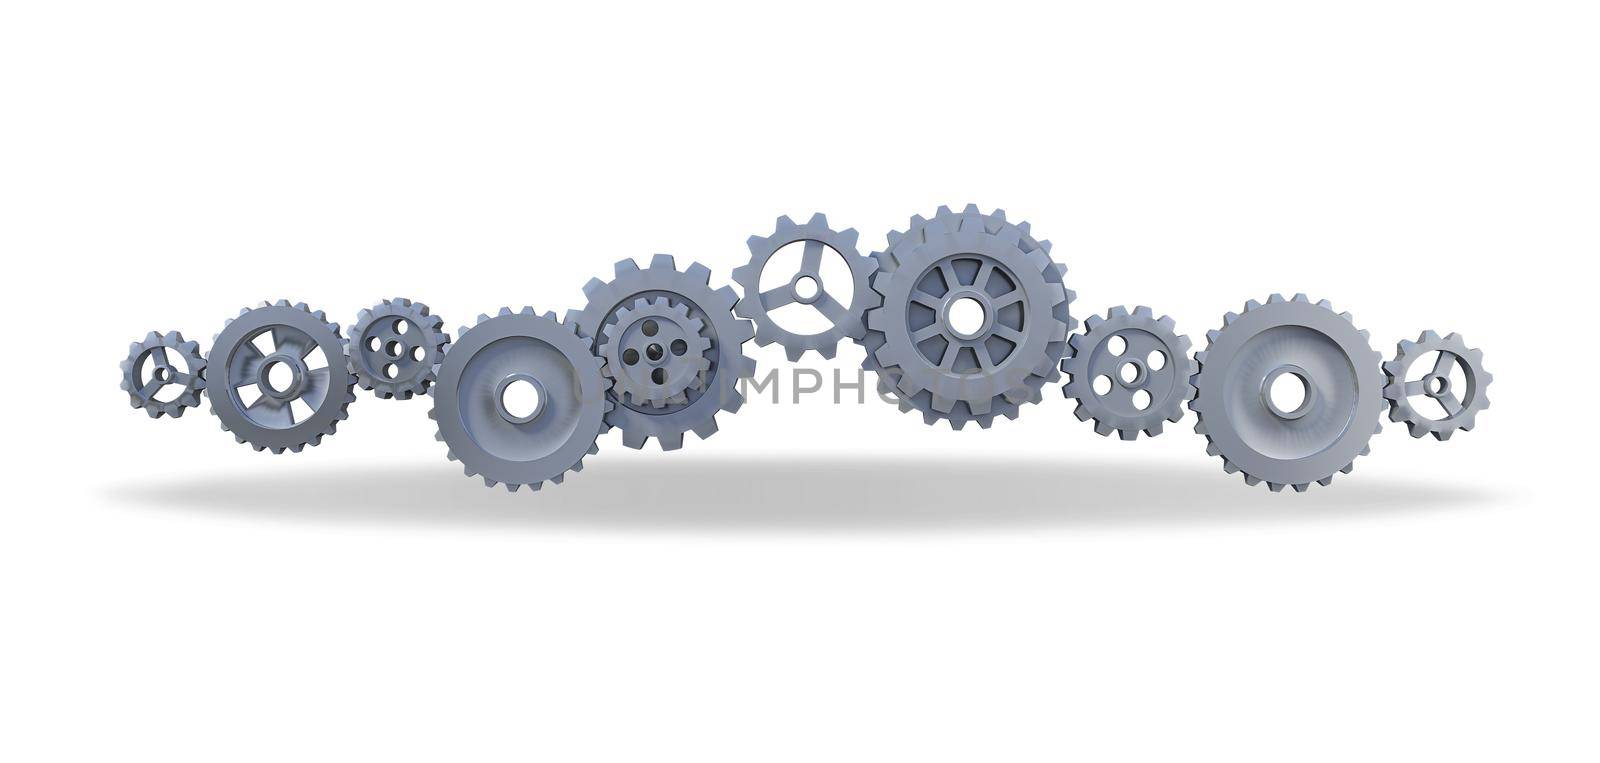 3ds rendering image of gears for mechanical background. Background mockup